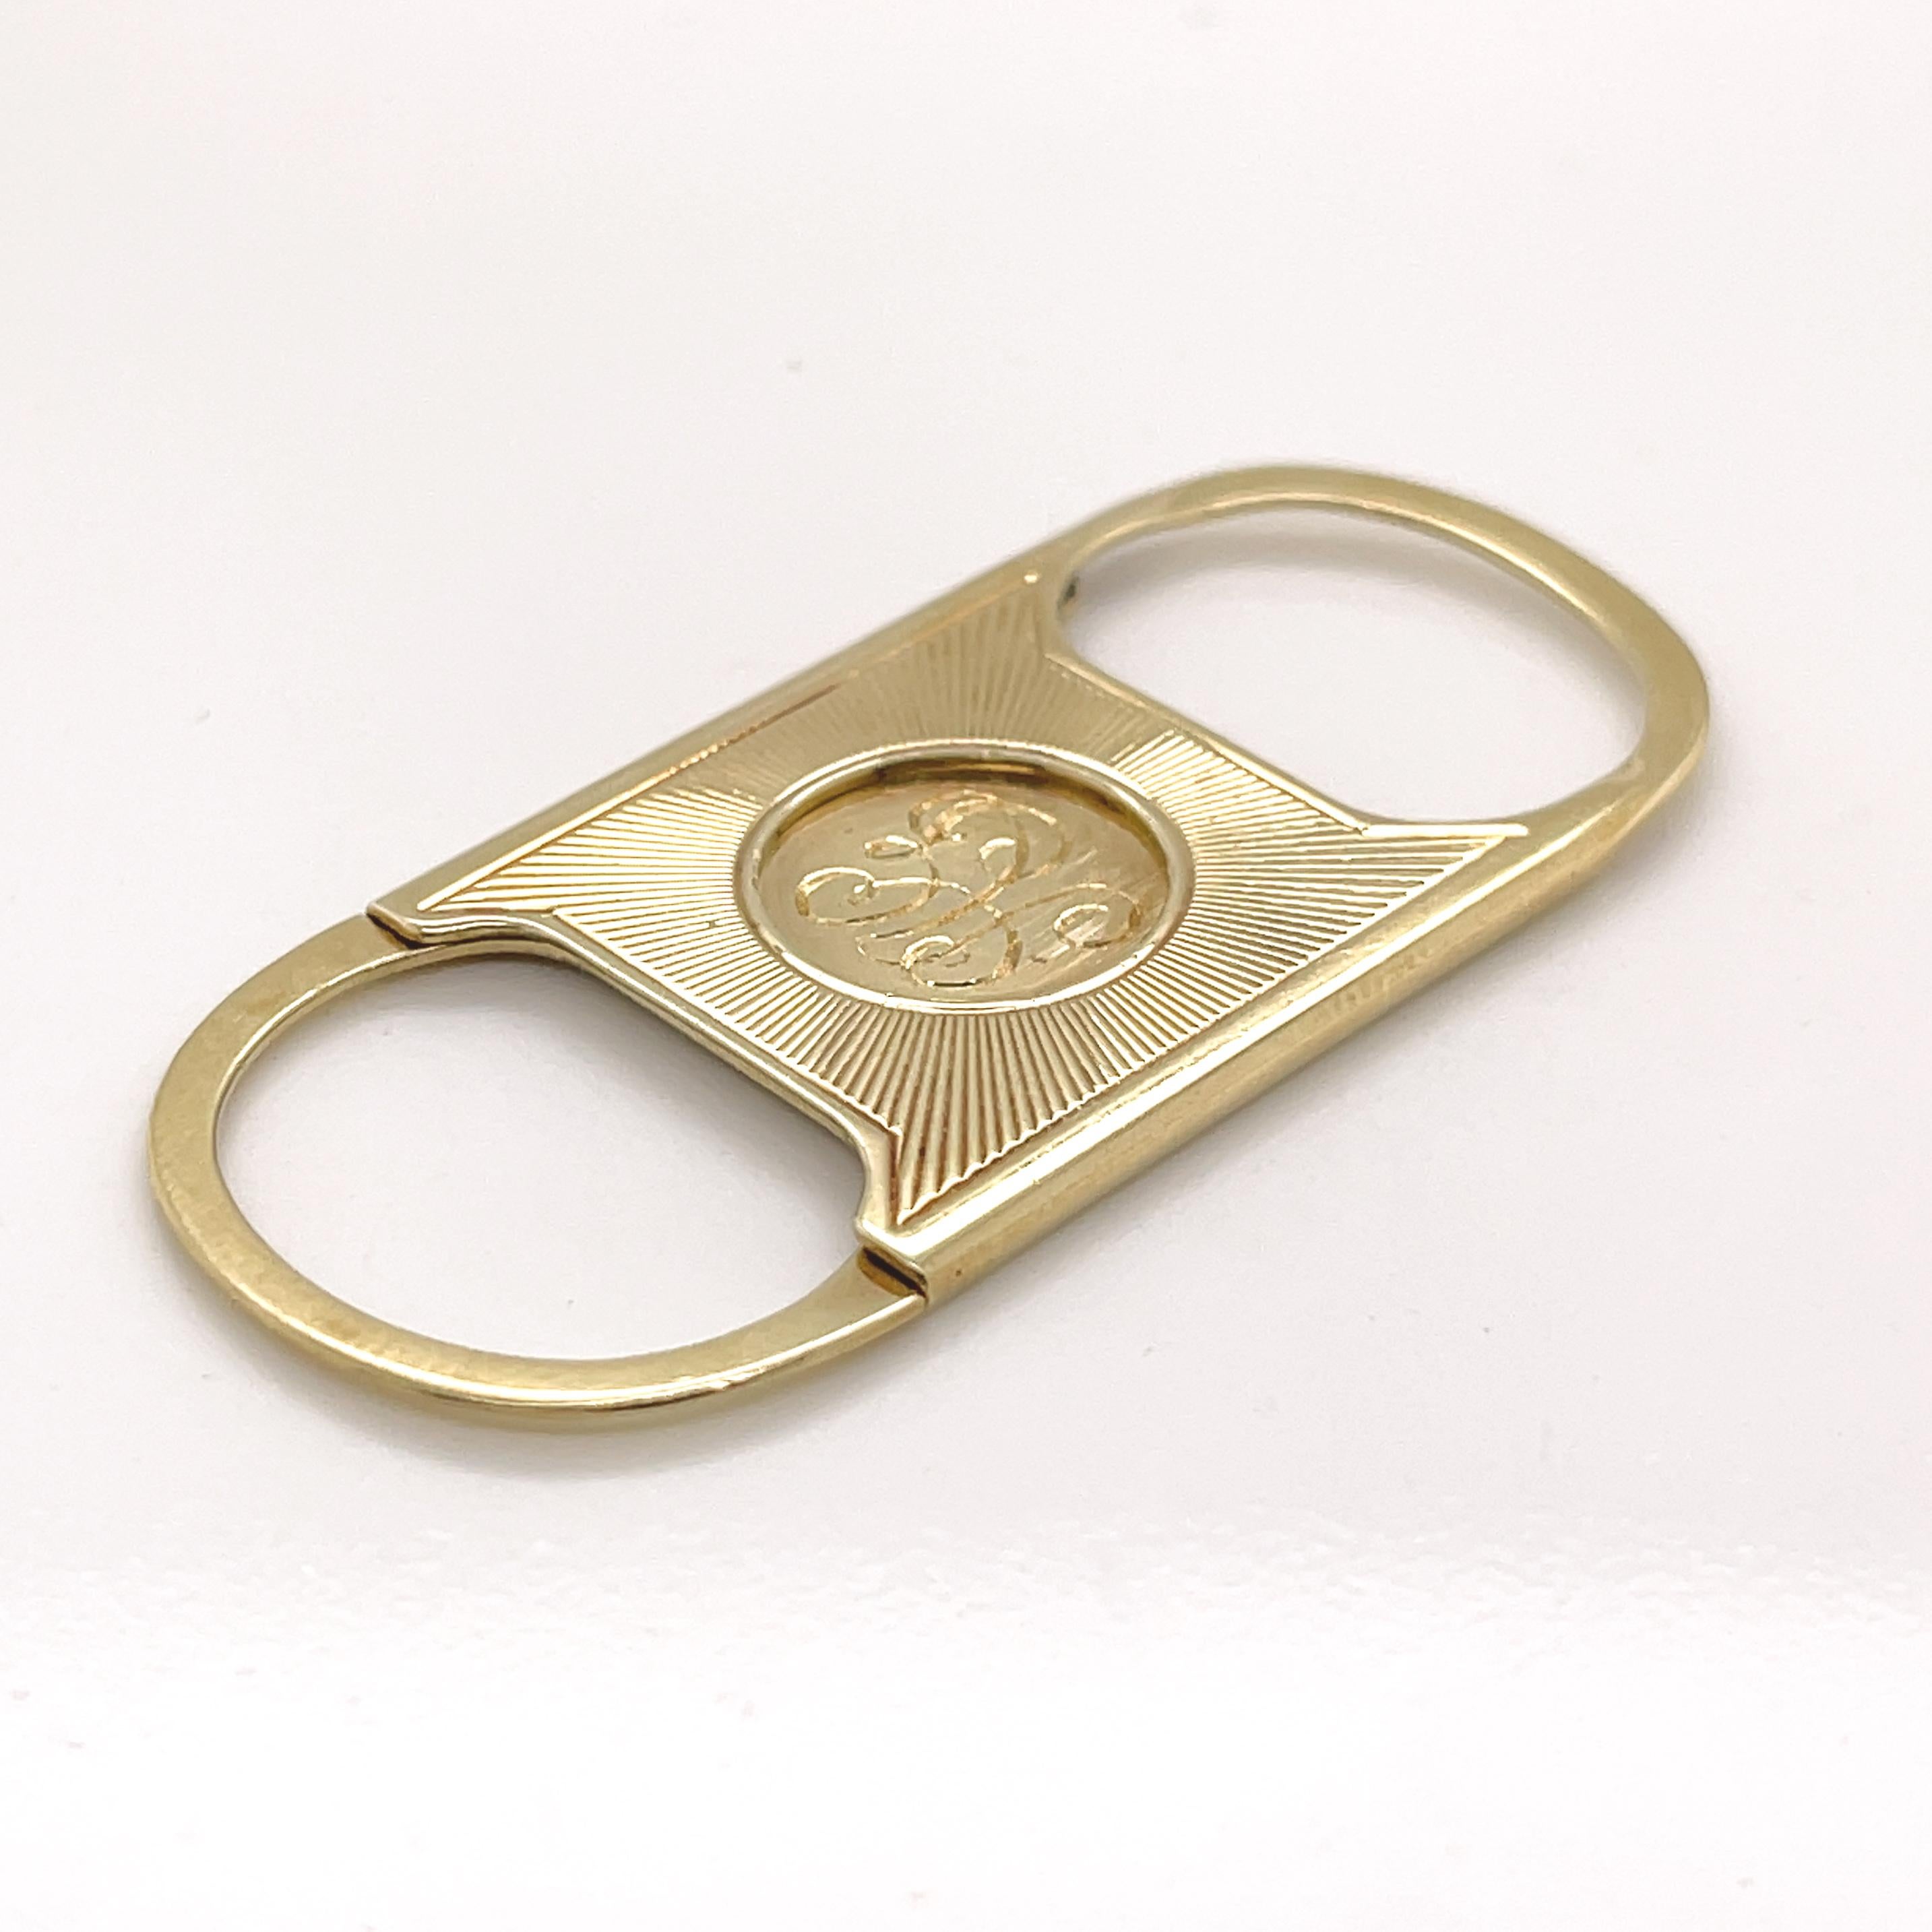 A very fine 14k gold cigarillo or cigar cutter.

By Tiffany & Co. 

A so-called Guillotine or straight-cut cutter.

With an engraved monogram.

The opening for the cigar is approx. 11.5 mm (or just about 0.45 inches) in diameter.

Simply a great